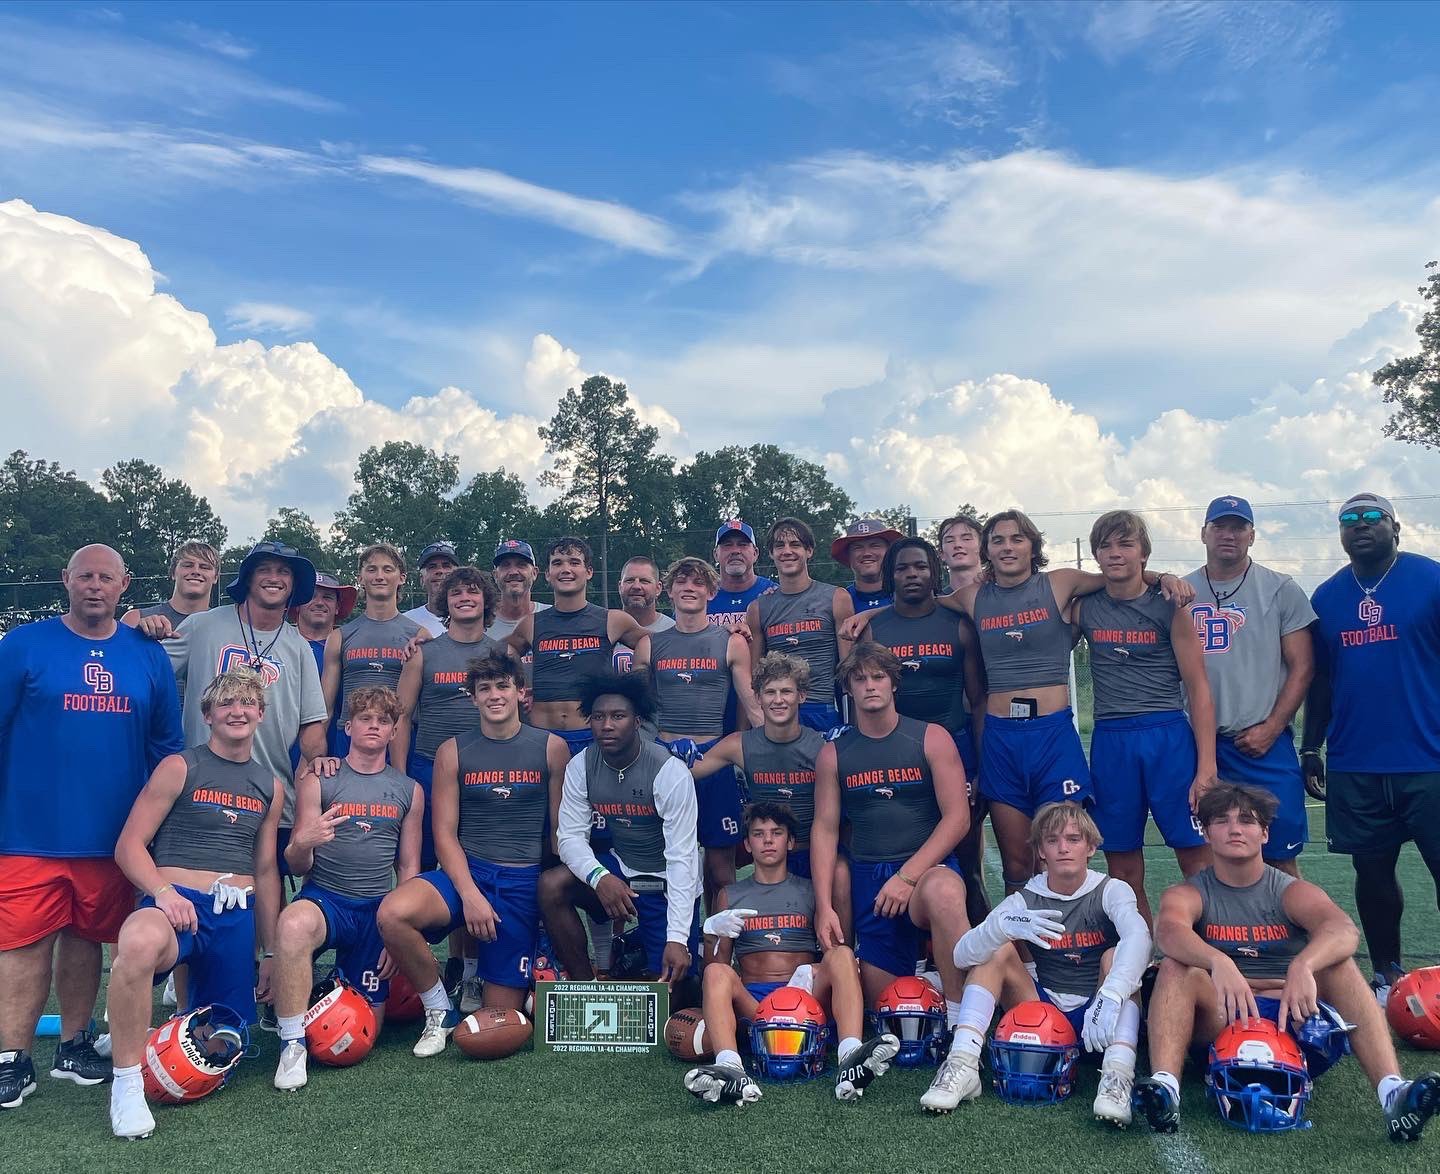 "We’ve won wherever I’ve been, I expect to win here," said Orange Beach head coach Jamey DuBose. The Makos got off on the right foot and won the Class 1A-4A bracket at the Hoover 7-on-7 tournament last weekend.